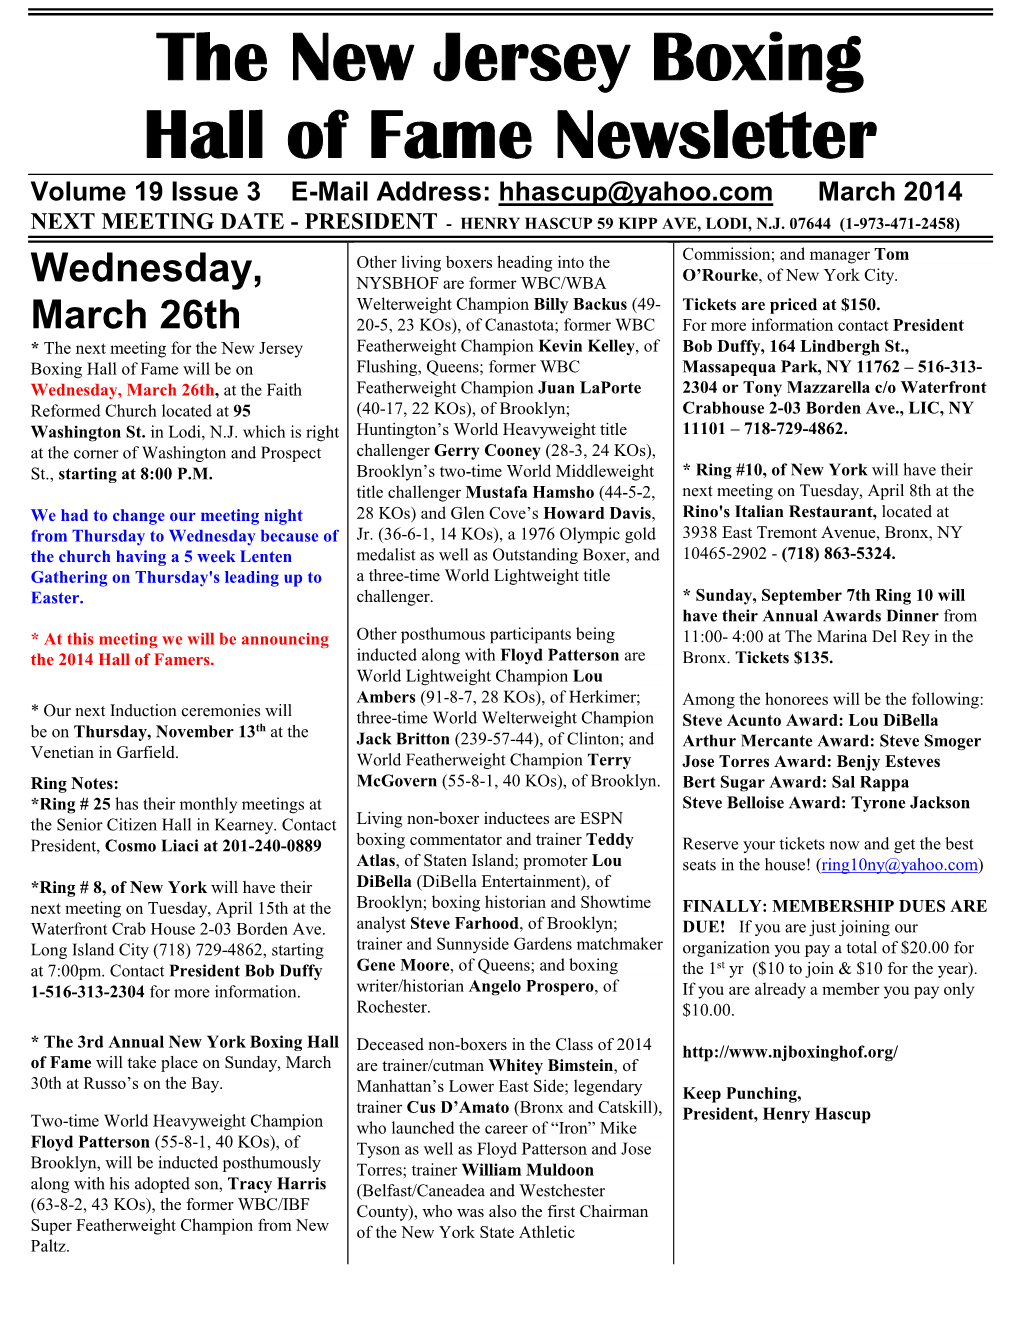 N.J. Boxing Hall of Fame Newsletter March 2014